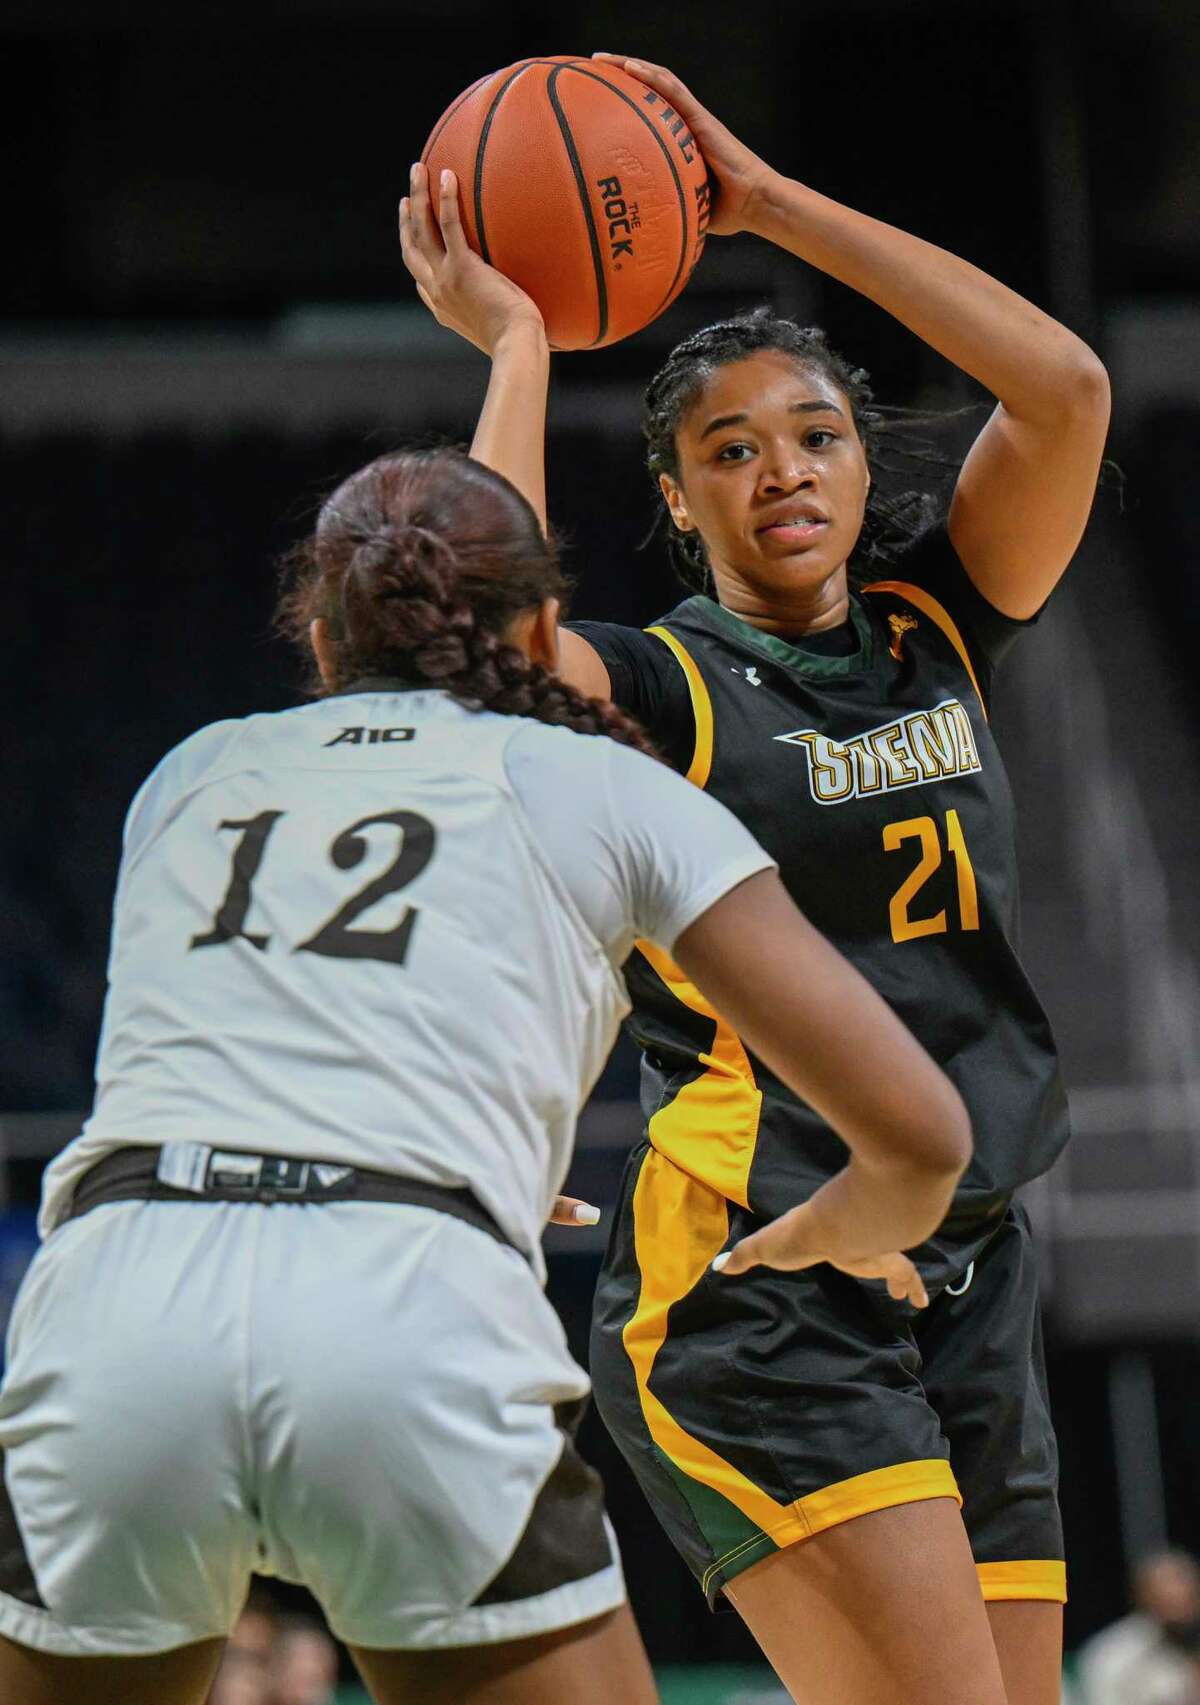 Siena sophomore forward Anajah Brown is one of four Saints who played in last year's close MAAC Tournament loss to Niagara in Atlantic City.